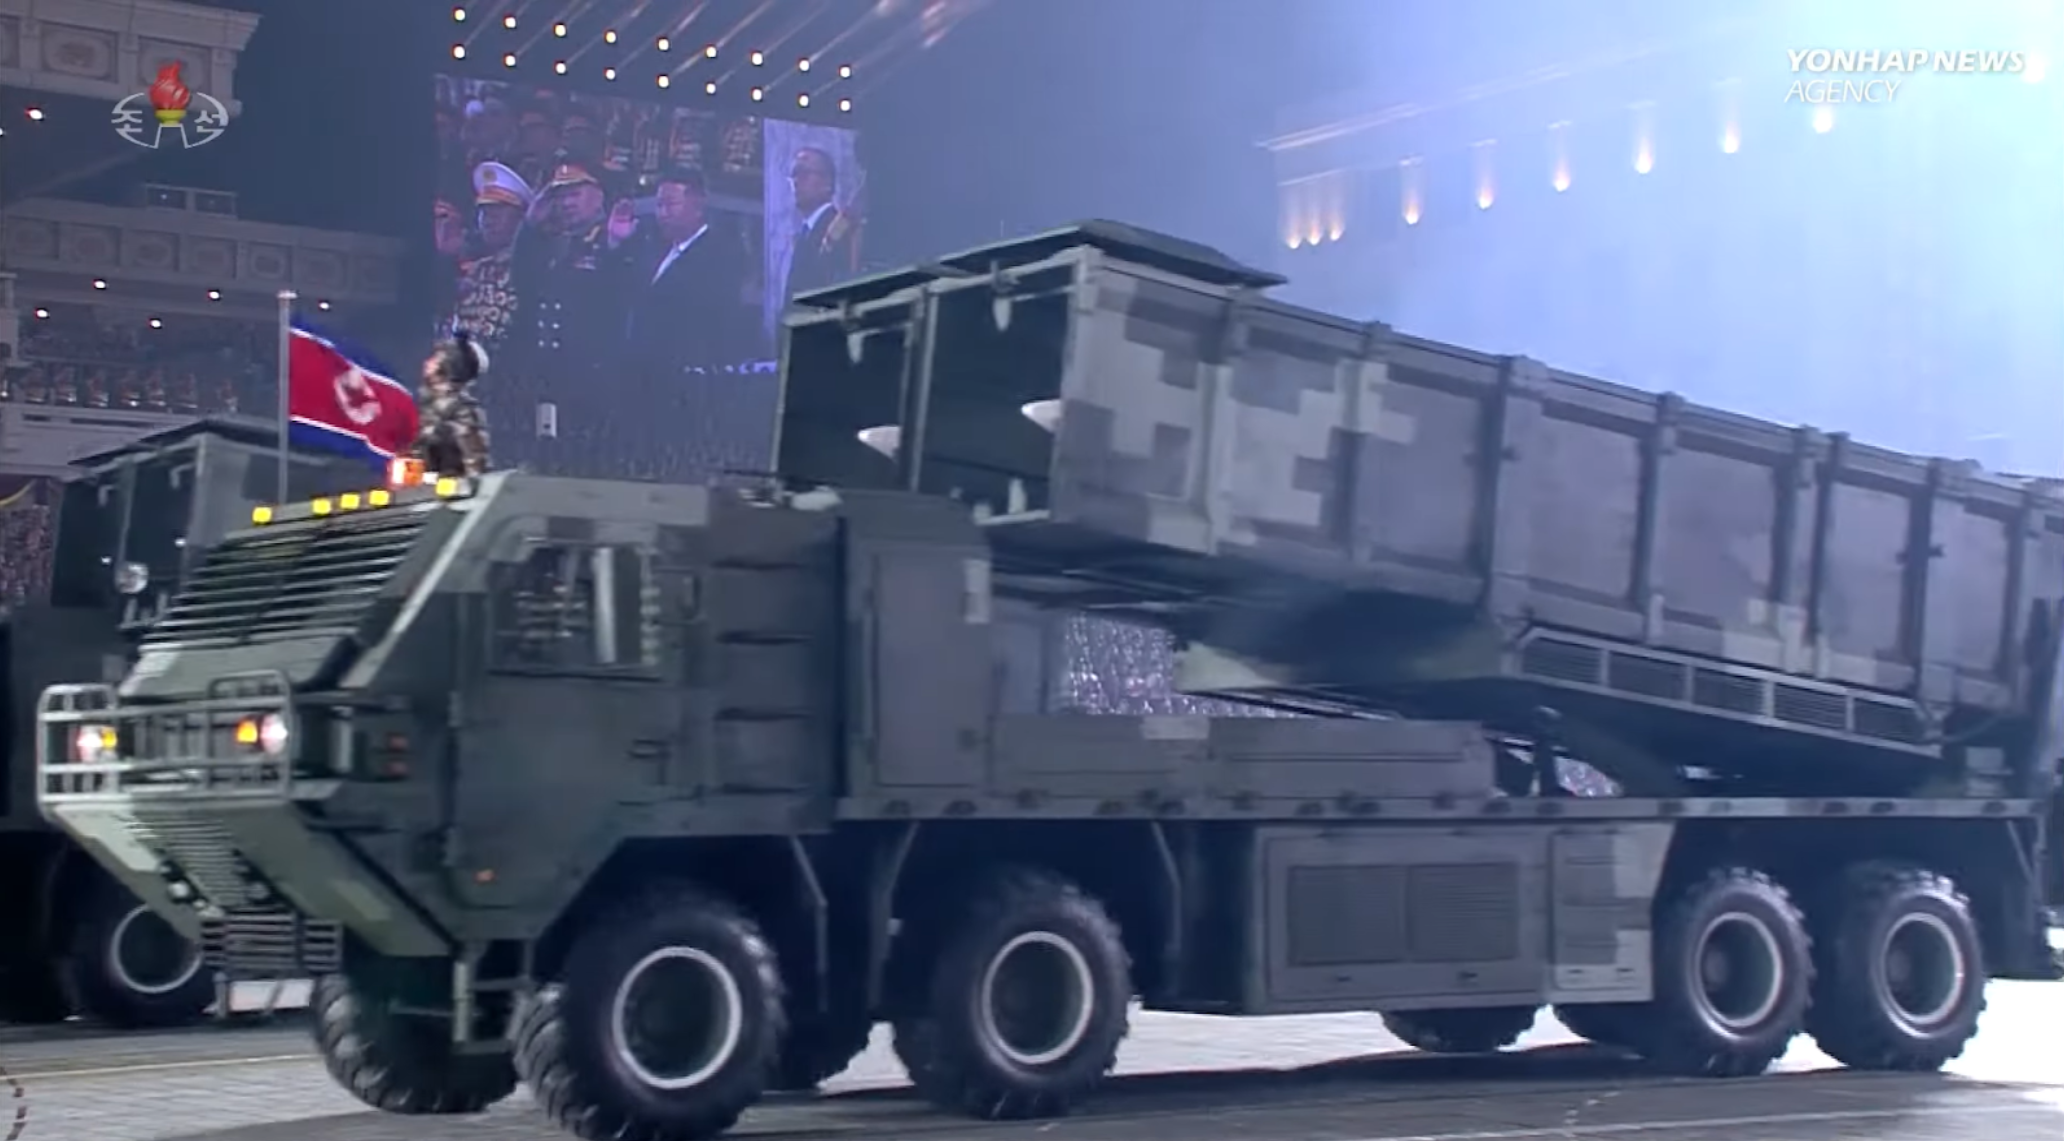 Figure 1. The Hwasong-11B (KN-24) was carried by truck chassis for the first time during the 27 July parade. The same truck model is also used to carry the land-attack cruise missiles. Image: KCNA/Yonhap